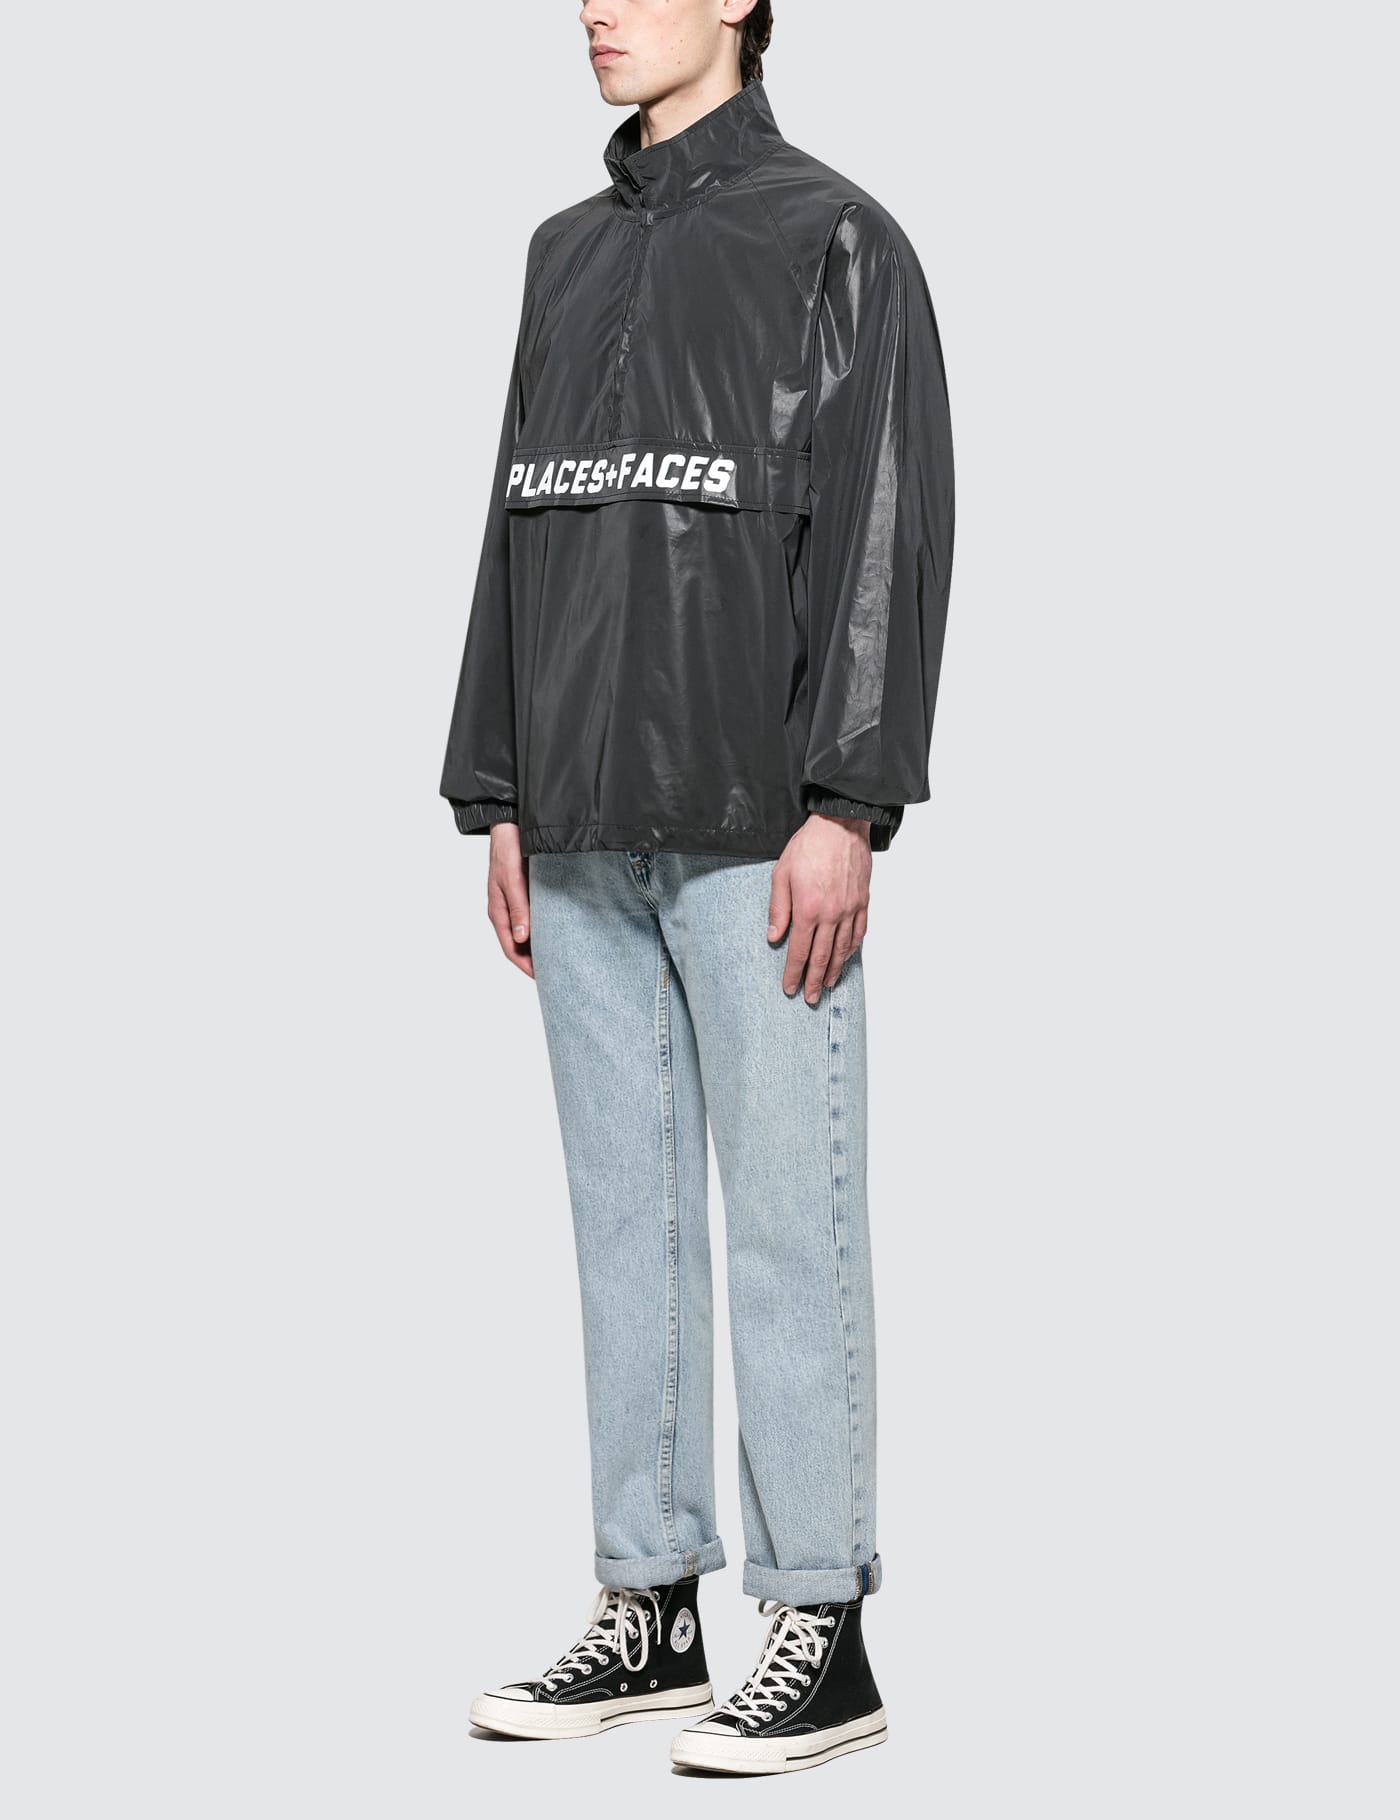 Places + Faces - Reflective Zip Up | HBX - HYPEBEAST 为您搜罗全球 ...